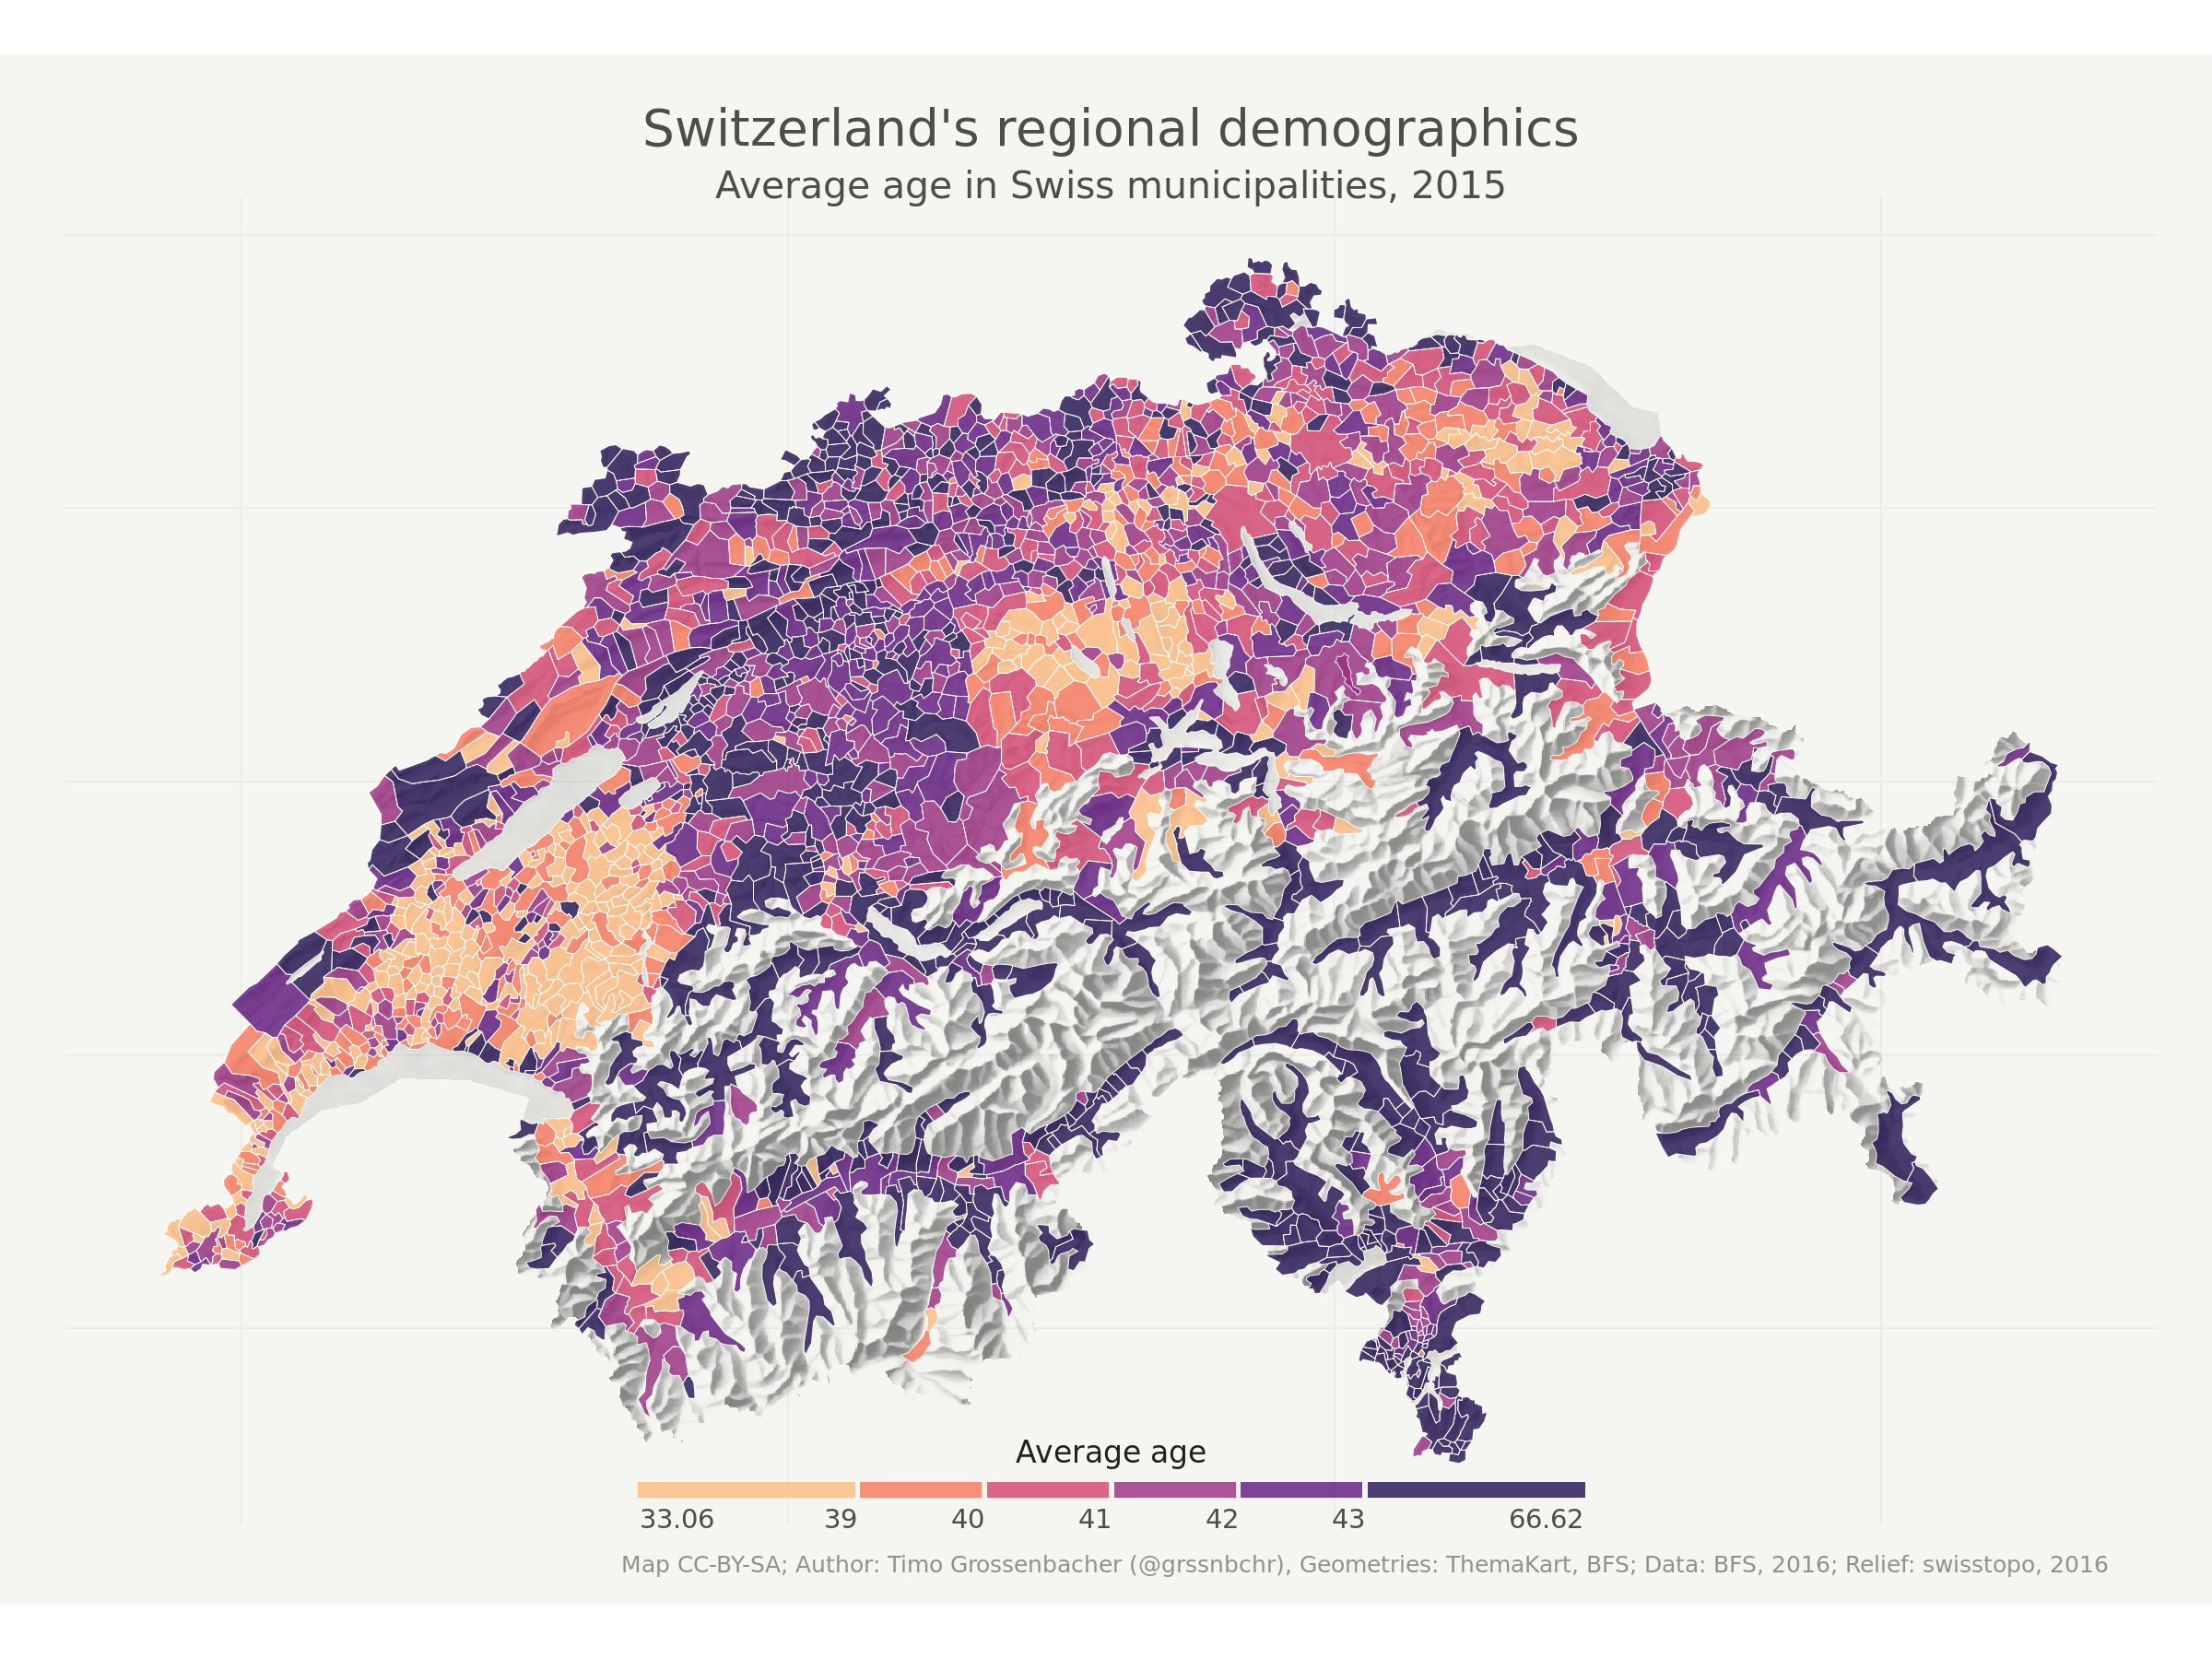 plot developed by Timo Grossenbacher that shows the average age in Swiss municipalities in 2015